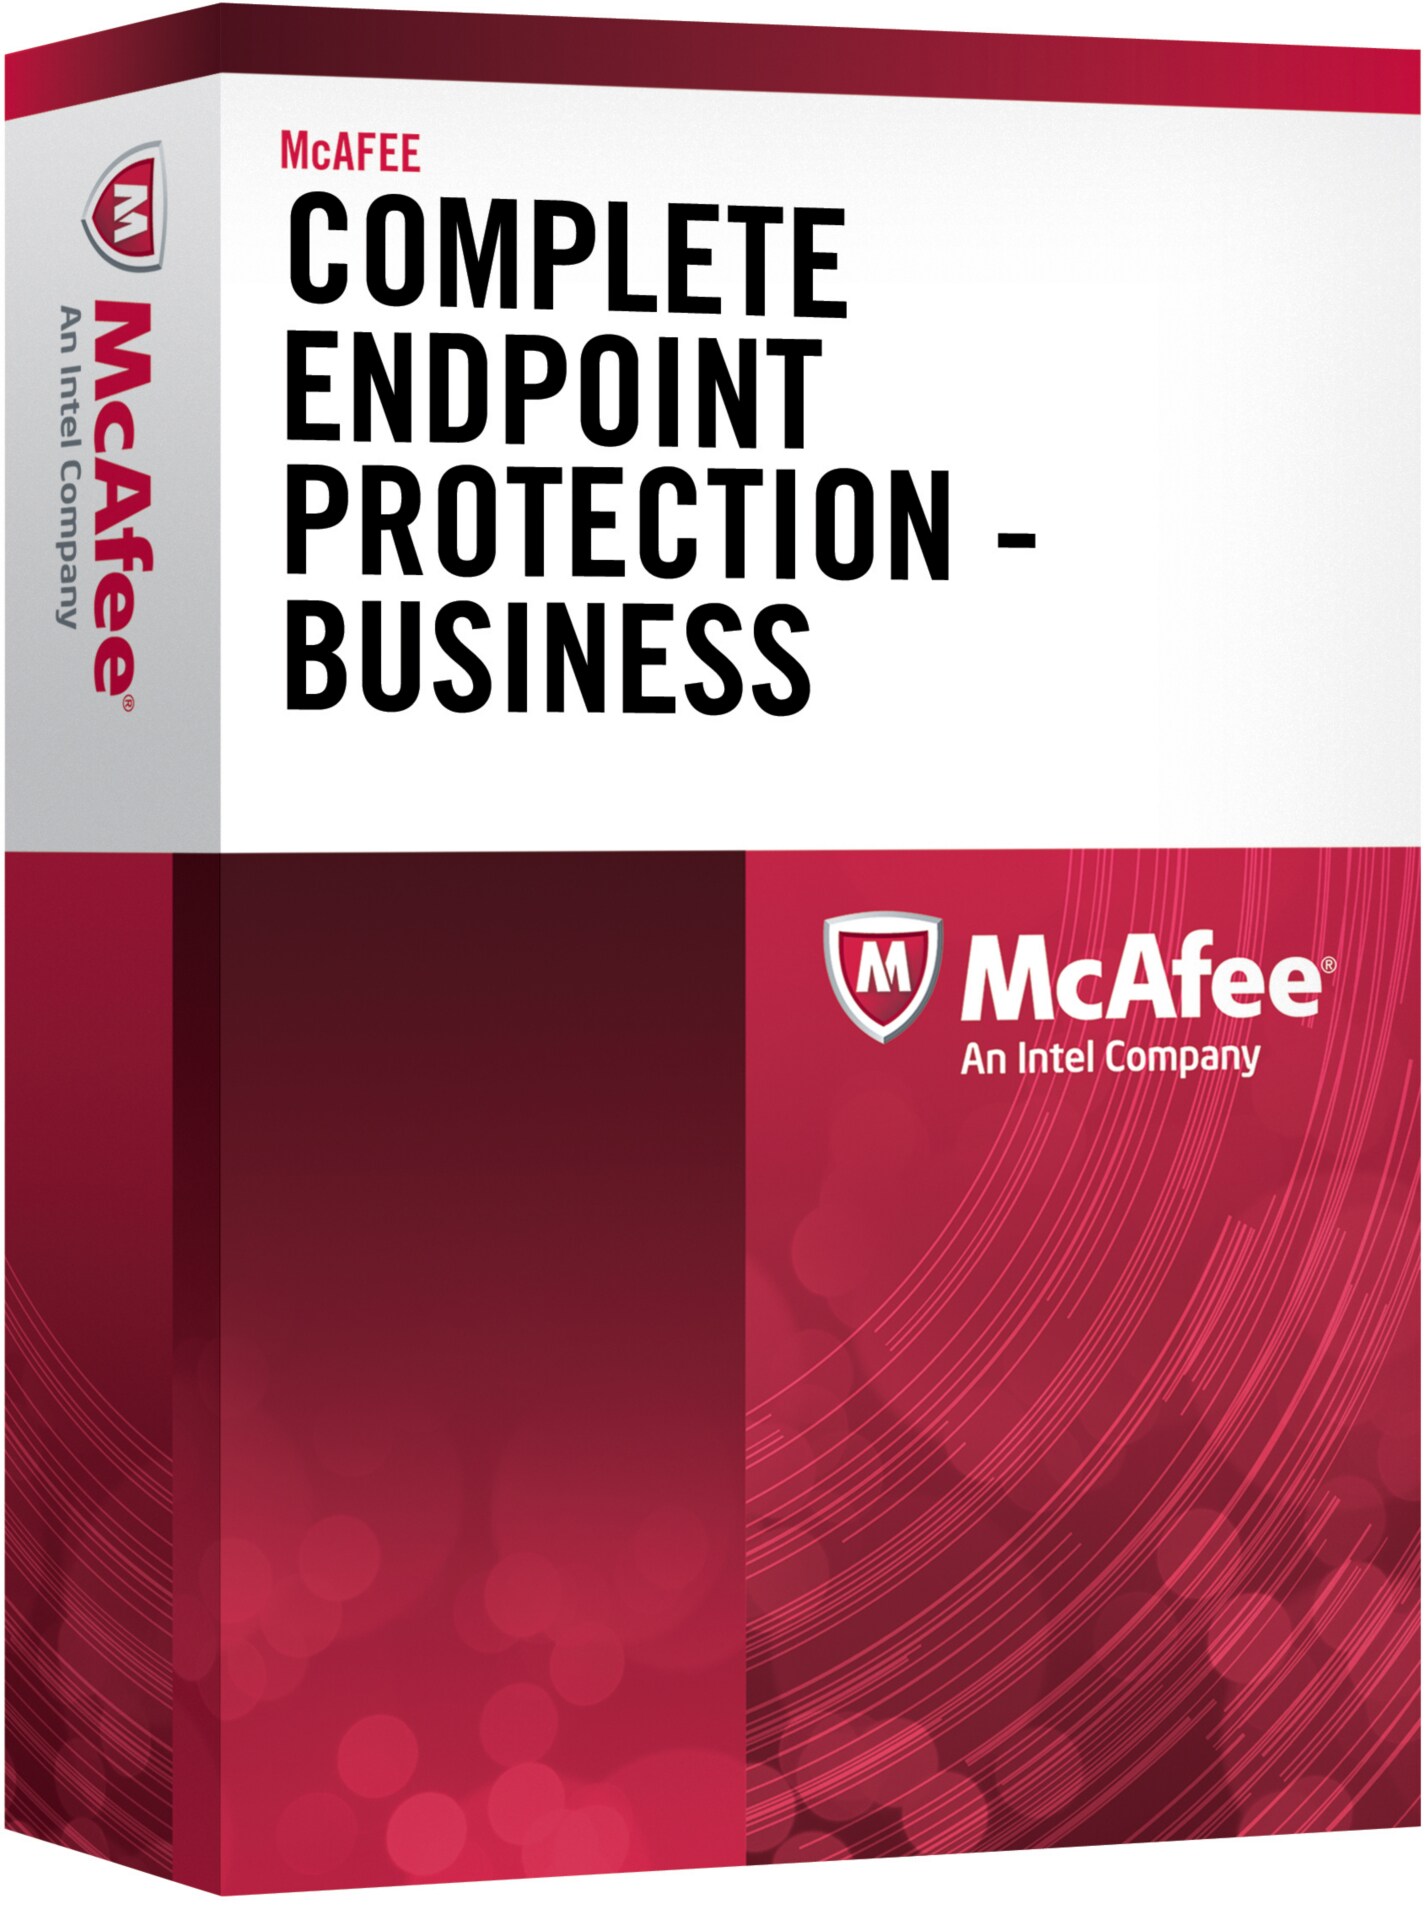 McAfee Complete EndPoint Protection Business - license + 1 Year Gold Business Support - 1 node